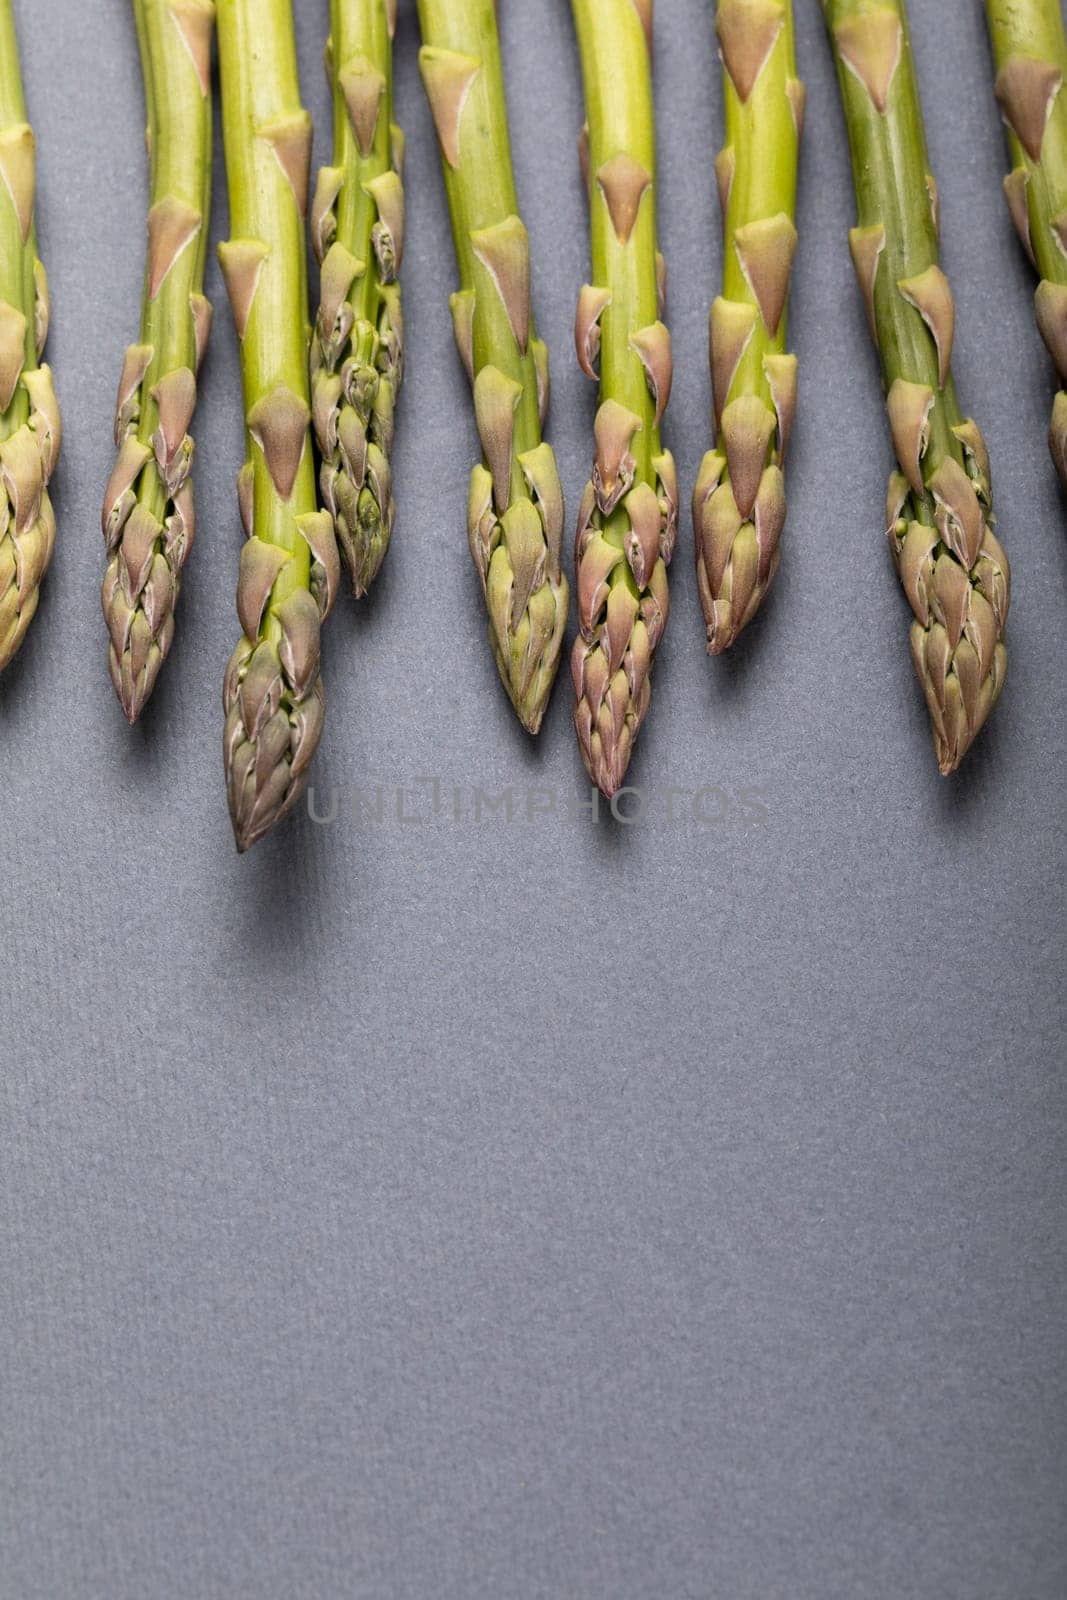 Directly above close-up view of fresh green asparagus over copy space on gray background by Wavebreakmedia